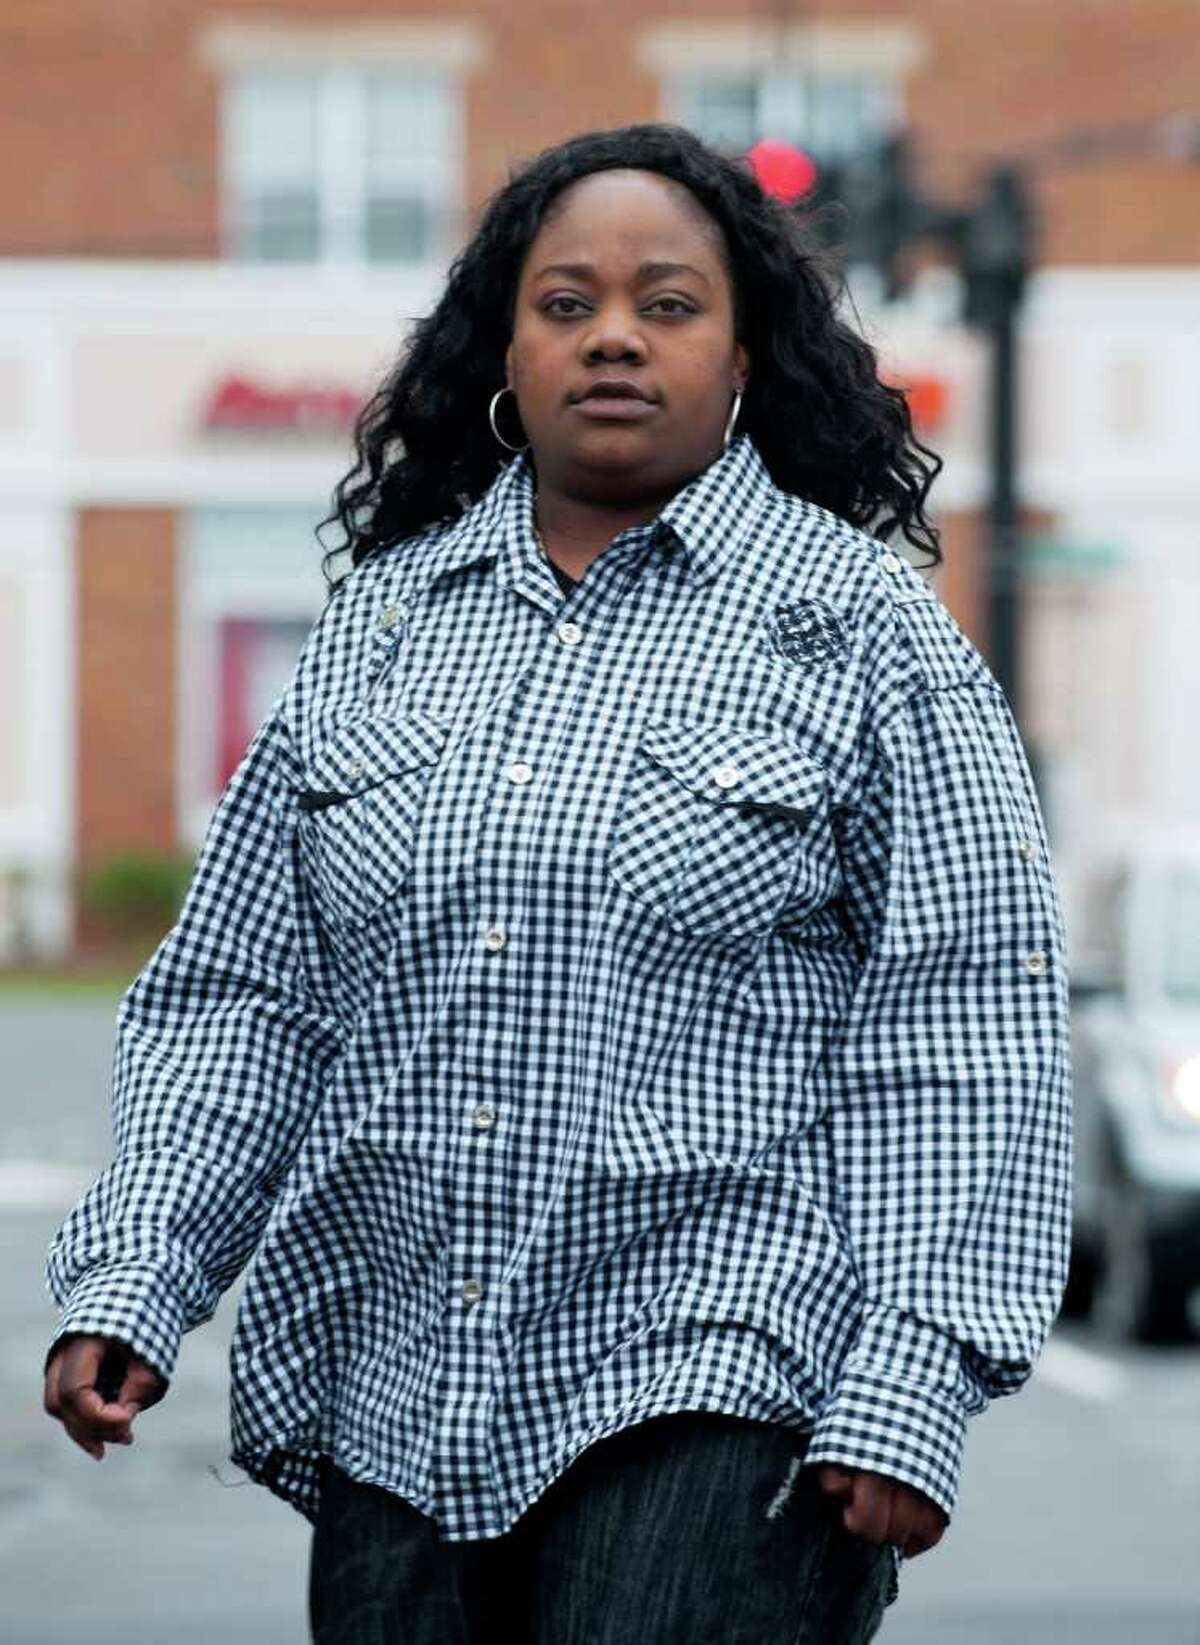 Tanya McDowell, the homeless mother arrested for allegedly sending her son to a Norwalk school while not living in the city during the last half of the 2010 school year, went to court in Norwak for the second time on Wednesday, May 11, 2011. McDowell’s attorney, Darnell Crosland, said he decided to waive her appearance after talking over the felony case with the Norwalk courthouse’s lead prosecutor. McDowell is charged with first-degree larceny and conspiracy to commit first-degree larceny. (Photo/Douglas Healey).